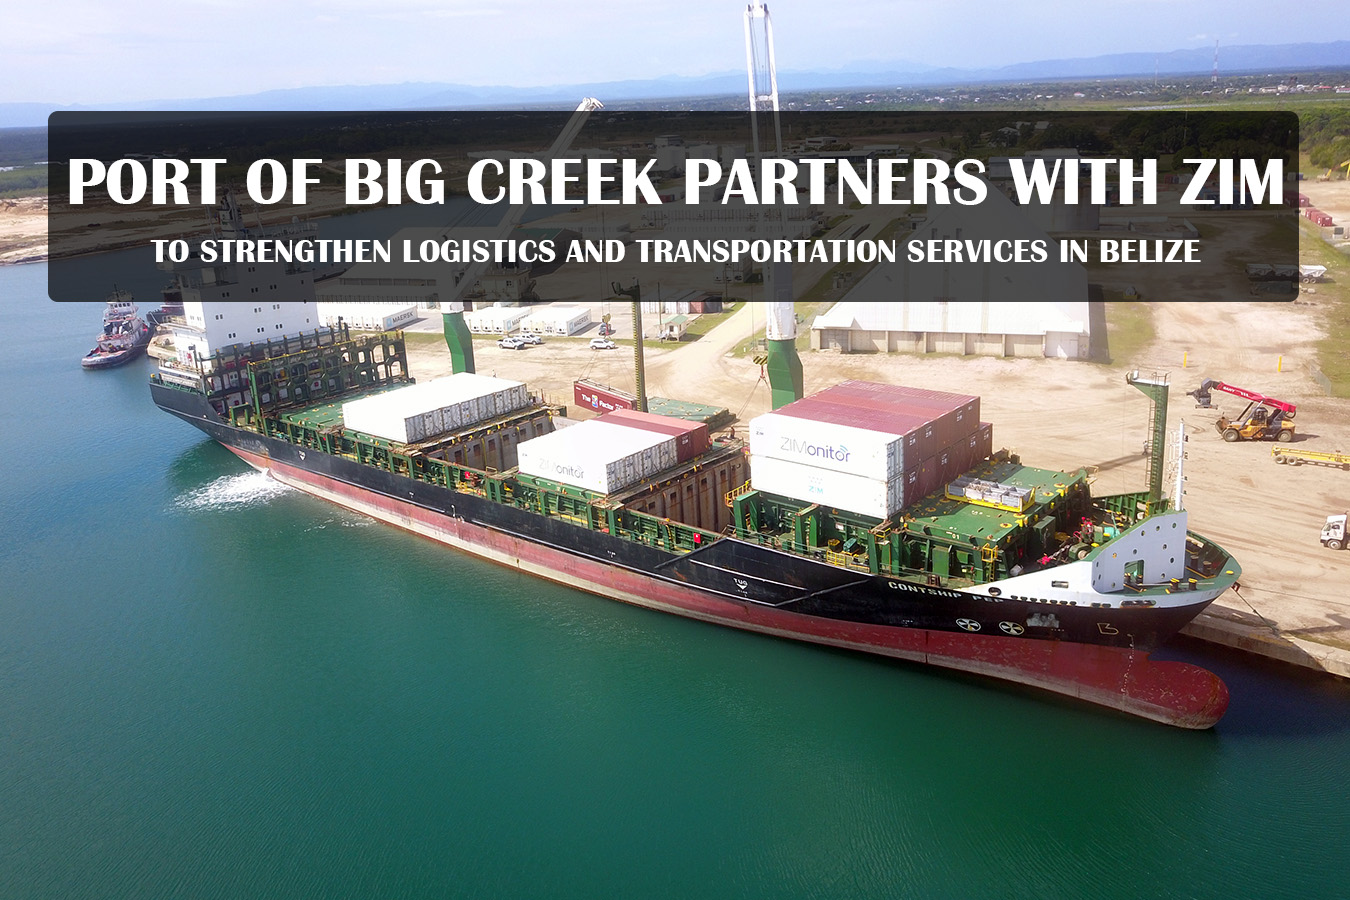 Port of Big Creek partners with ZIM Shipping to Strengthen Logistics and Transportation Services in Belize